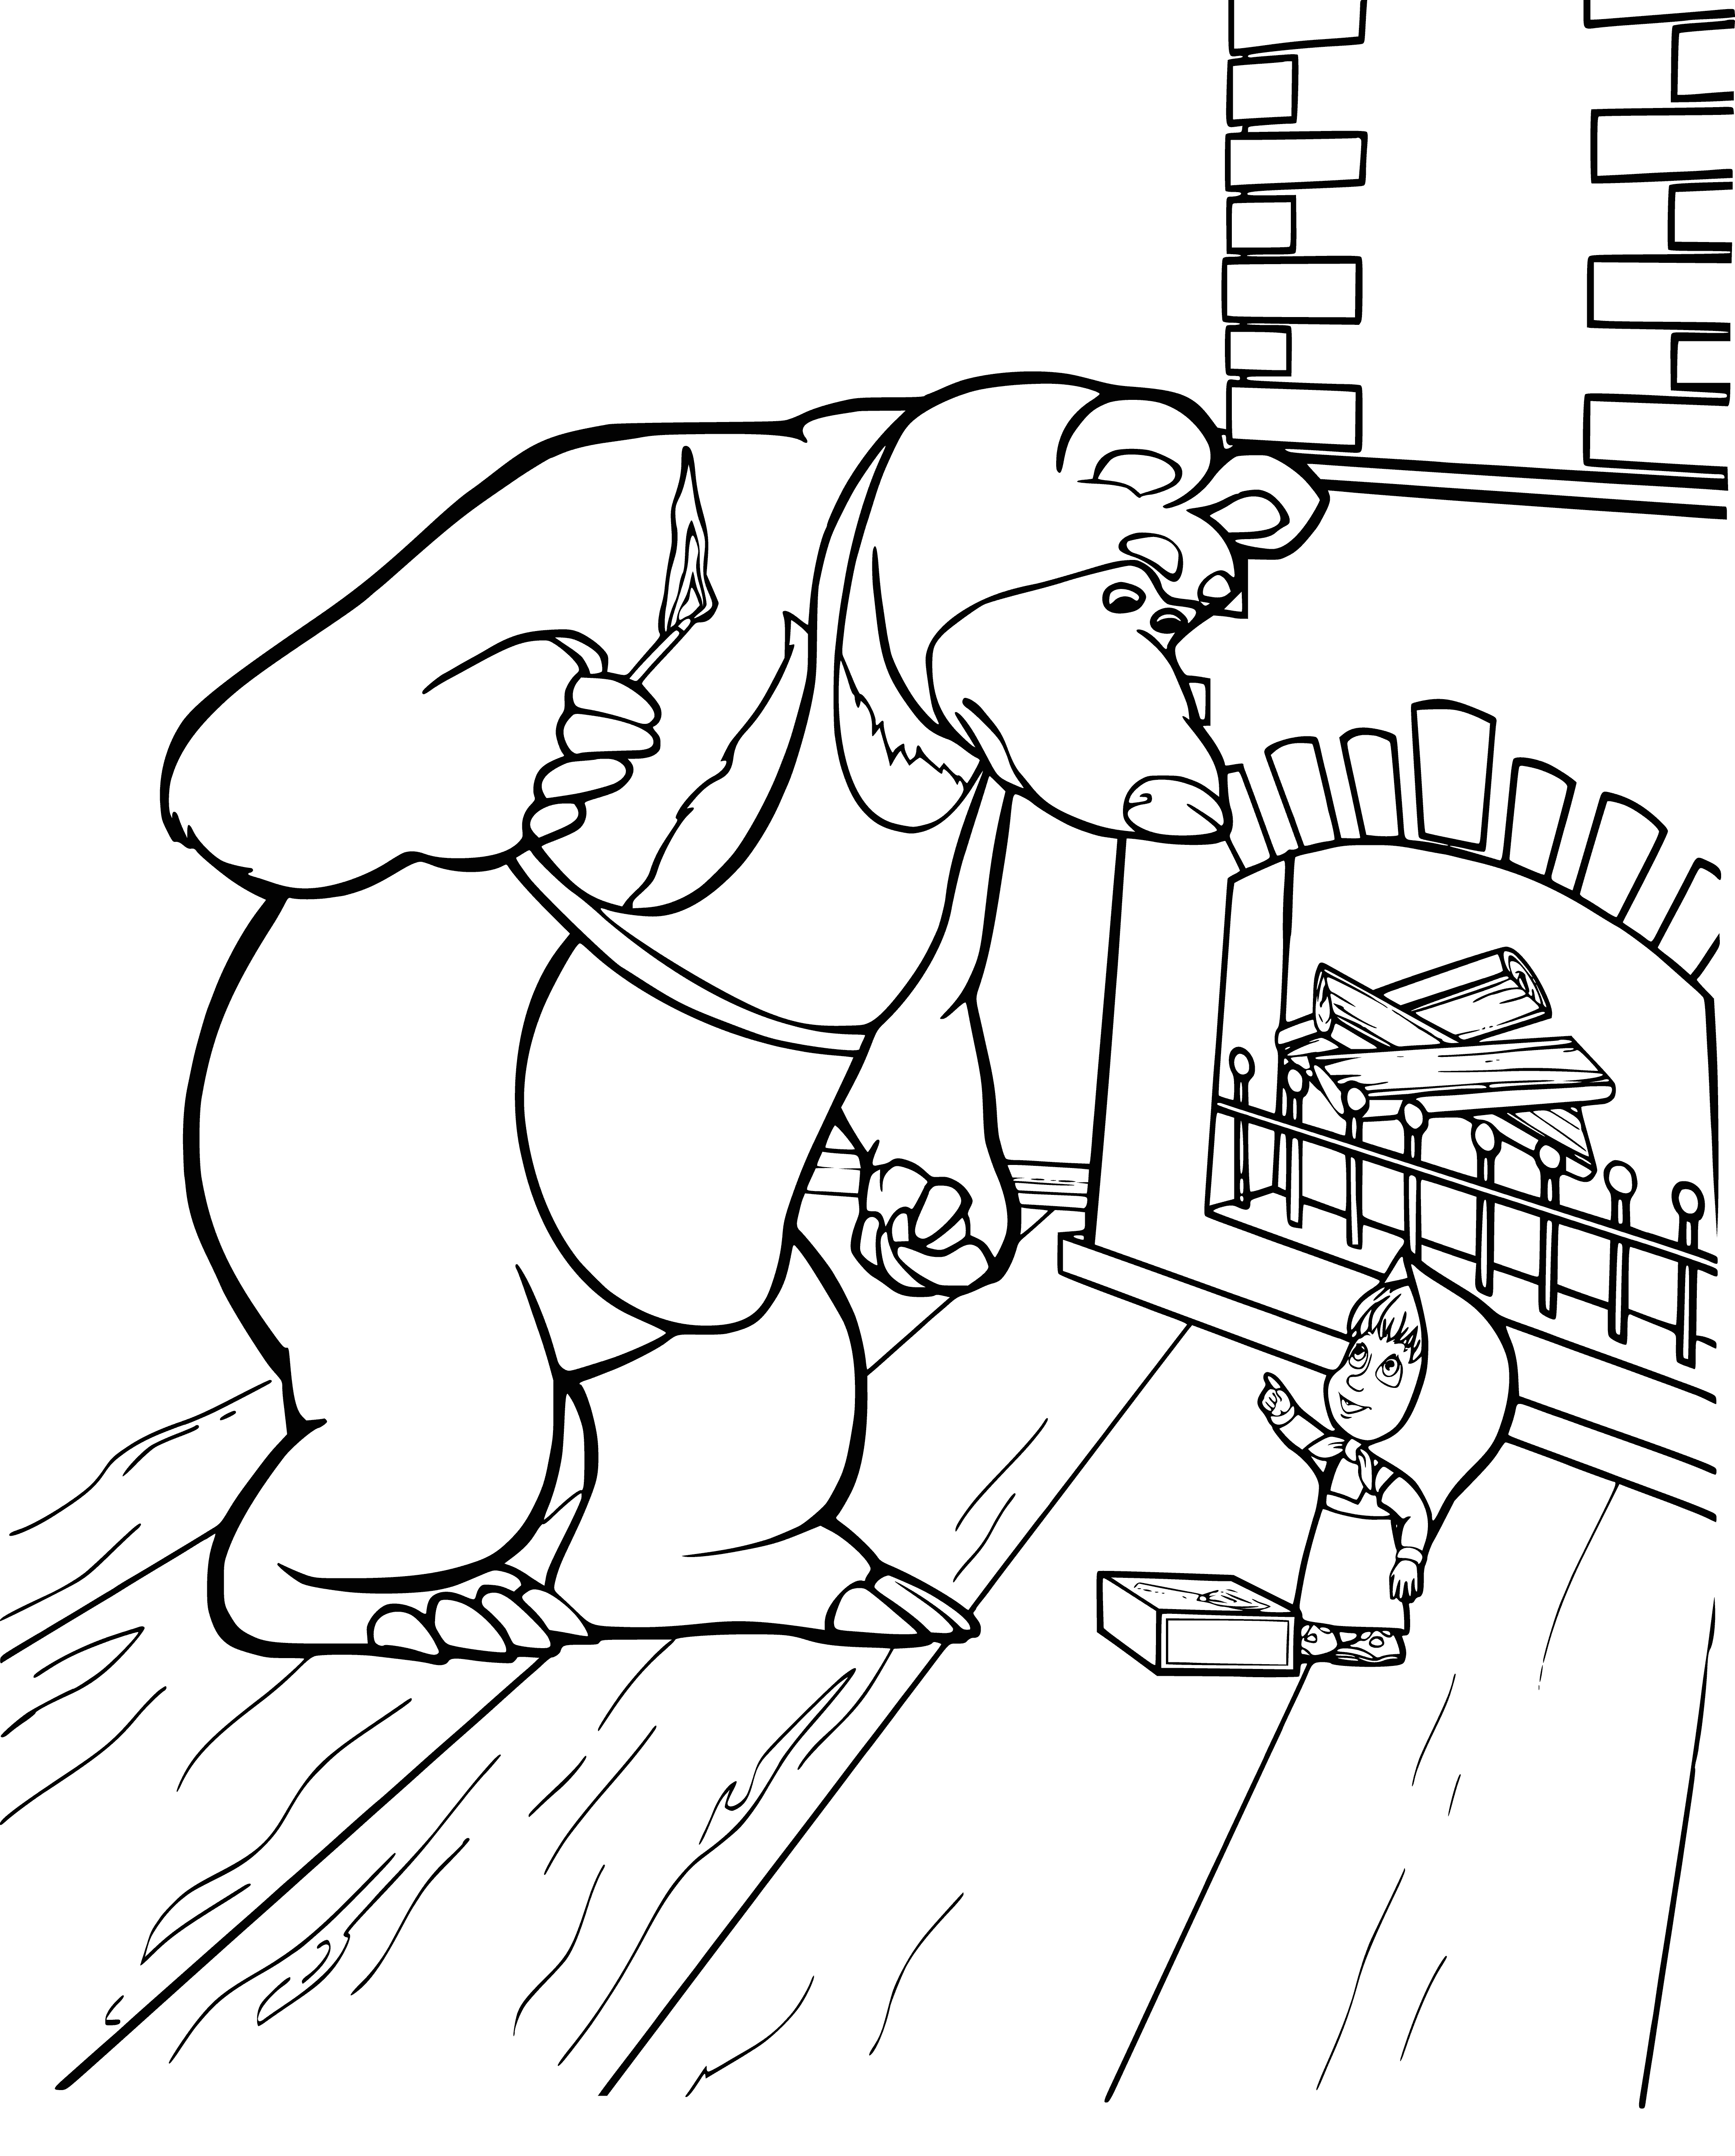 coloring page: Masha sits on a bench looking at the big brown bear on a tree stump; both appear to be captivated by each other.